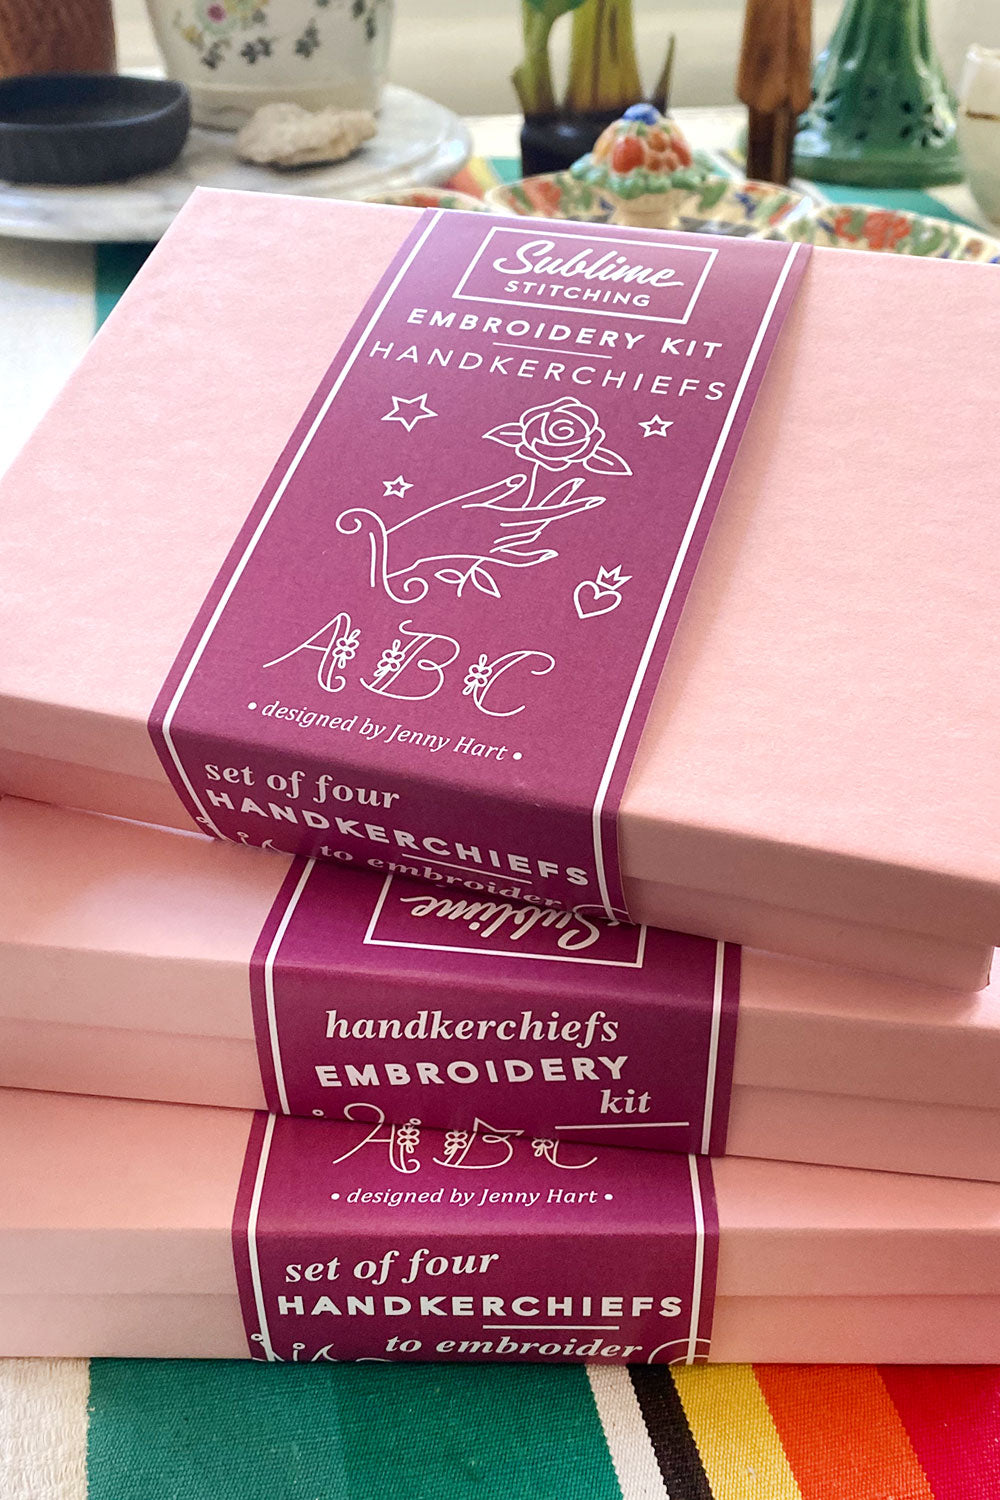 A stack of pink boxes with plum-colored belly bands that read "Sublime Stitching Embroidery Kit: Handkerchiefs"